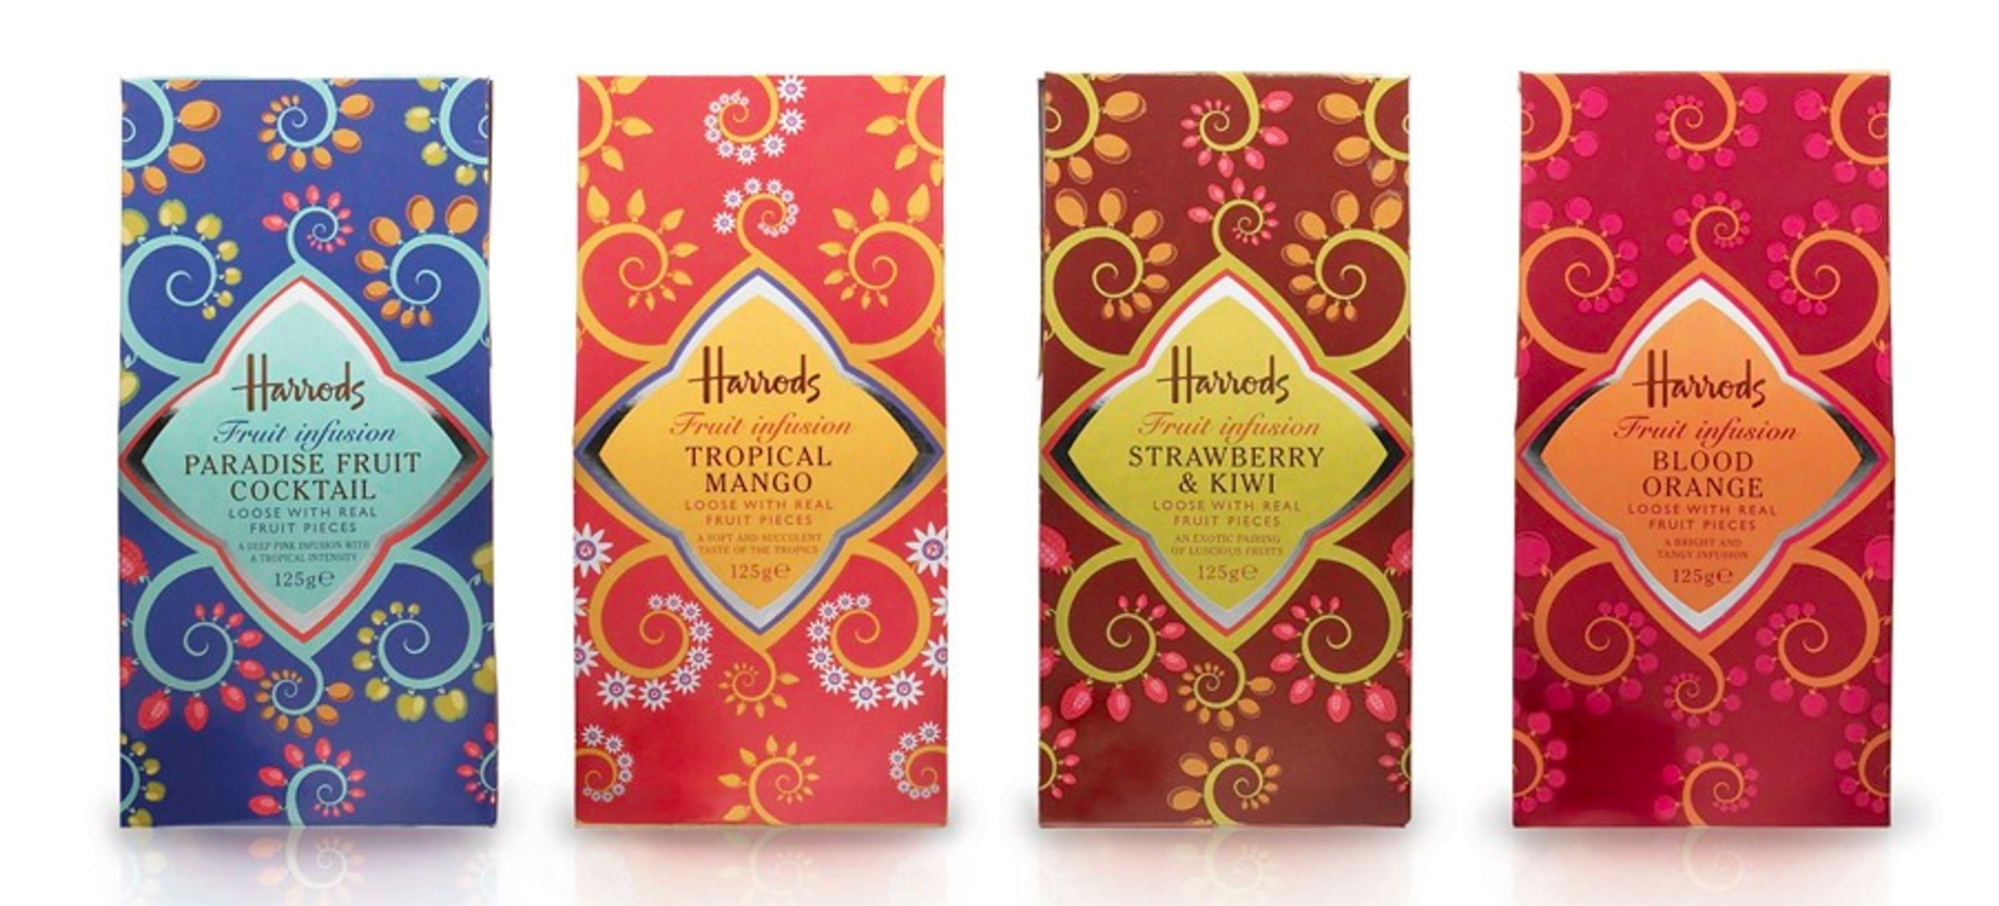 Examples of Harrods private labels including tea.